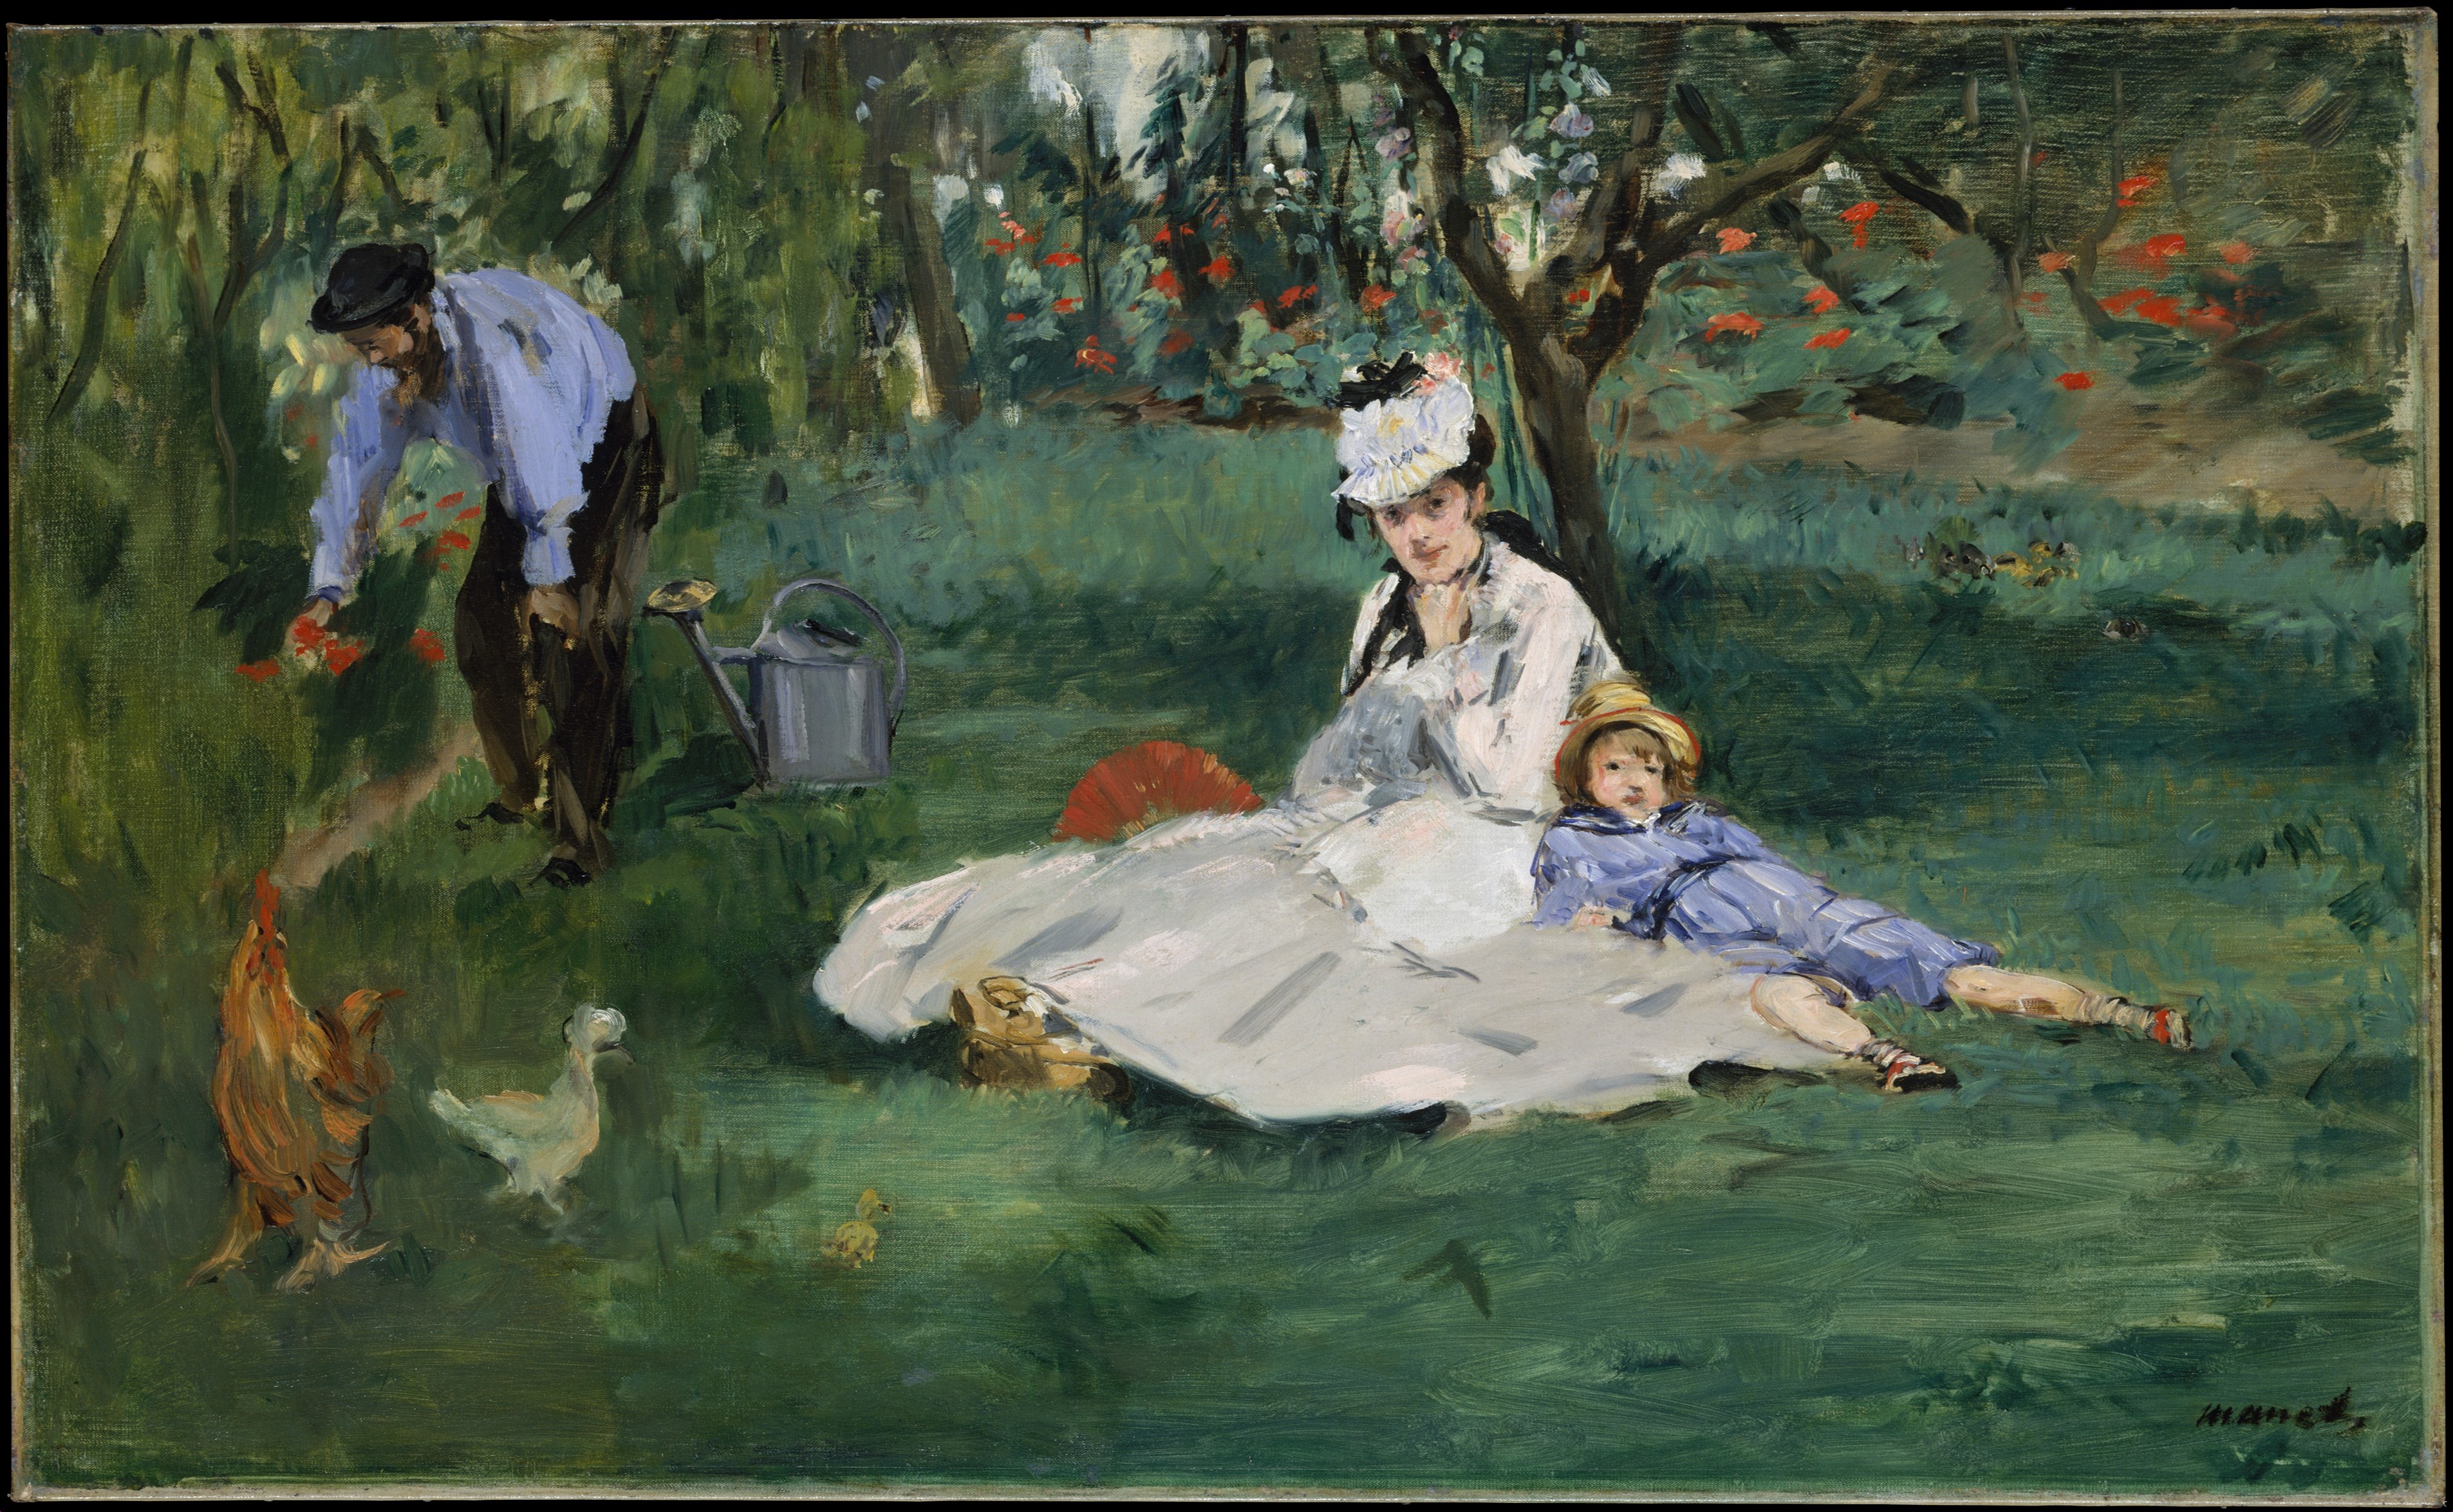 Édouard_Manet_--The_Monet_Family_in_Their_Garden_at_Argenteuil